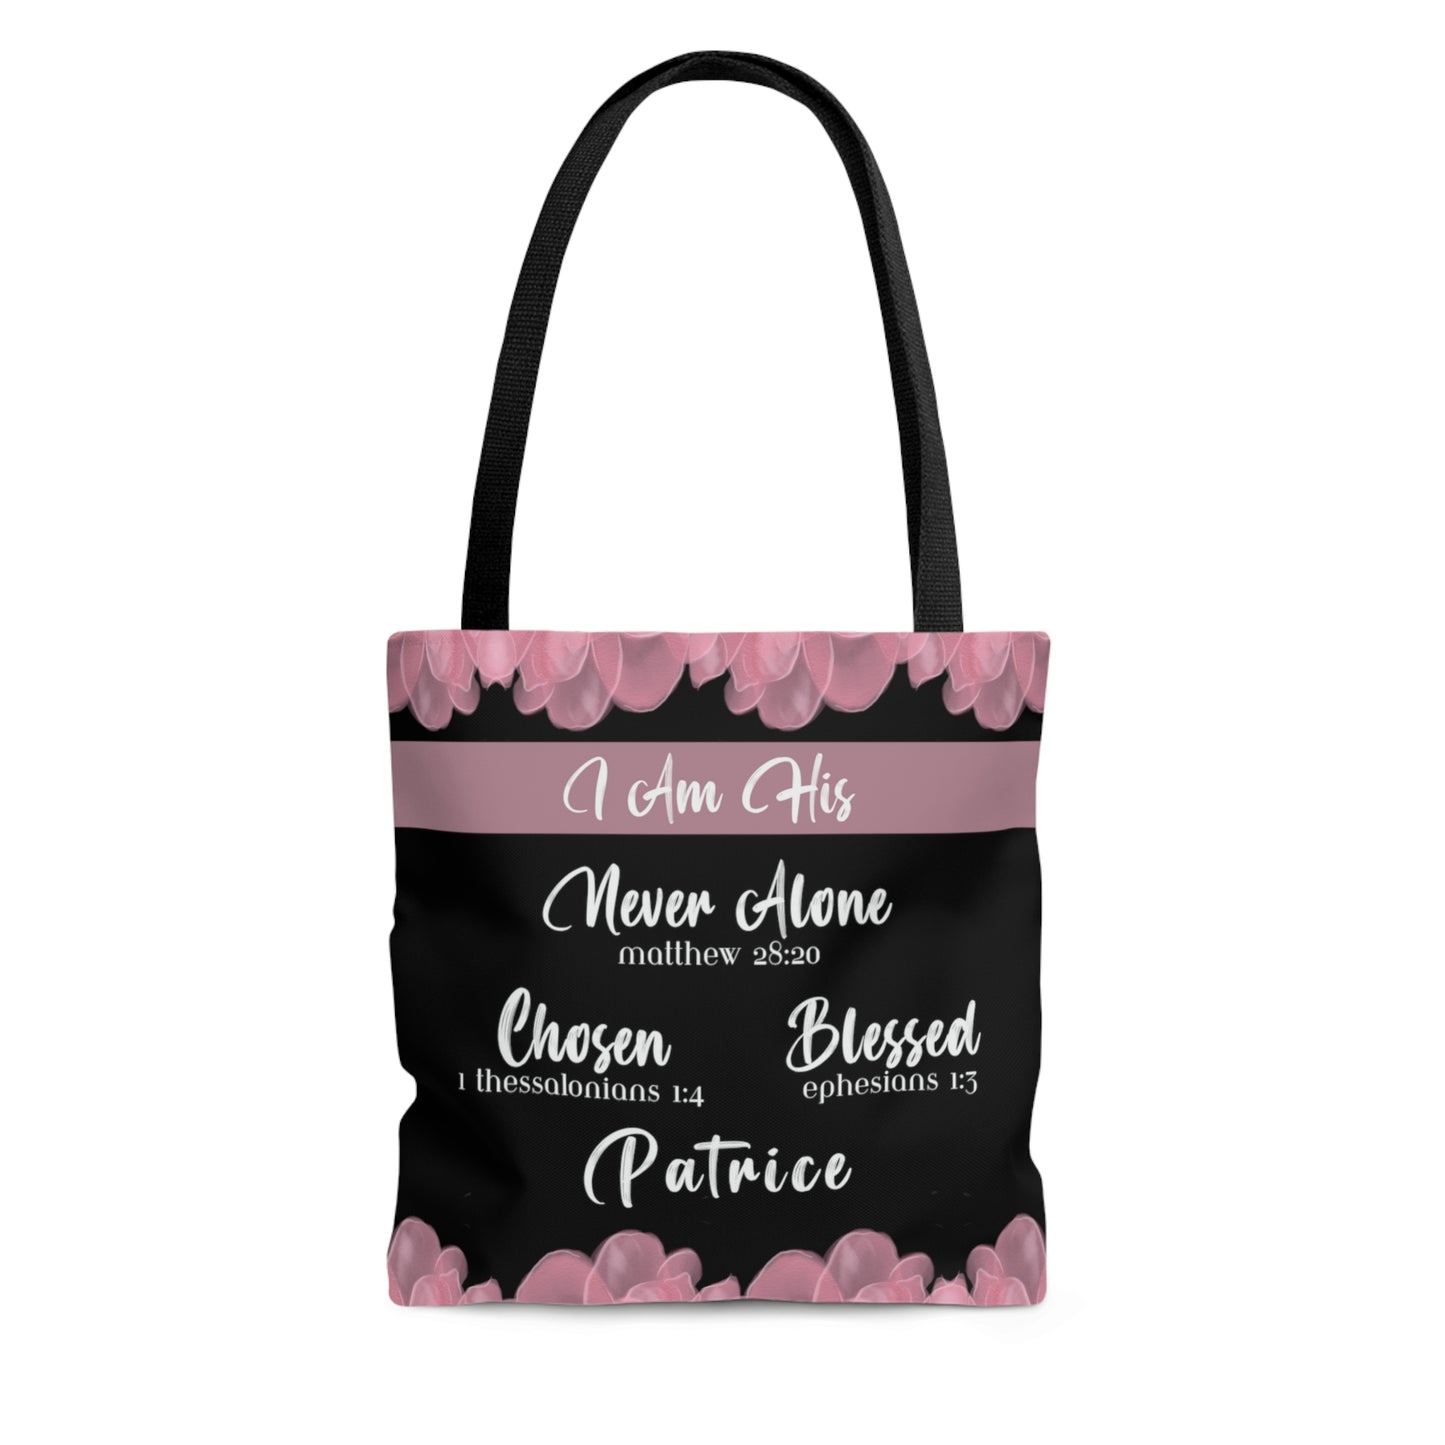 Personalized Bible Verse Tote Bag Pink Flowers Book or Bible Bag